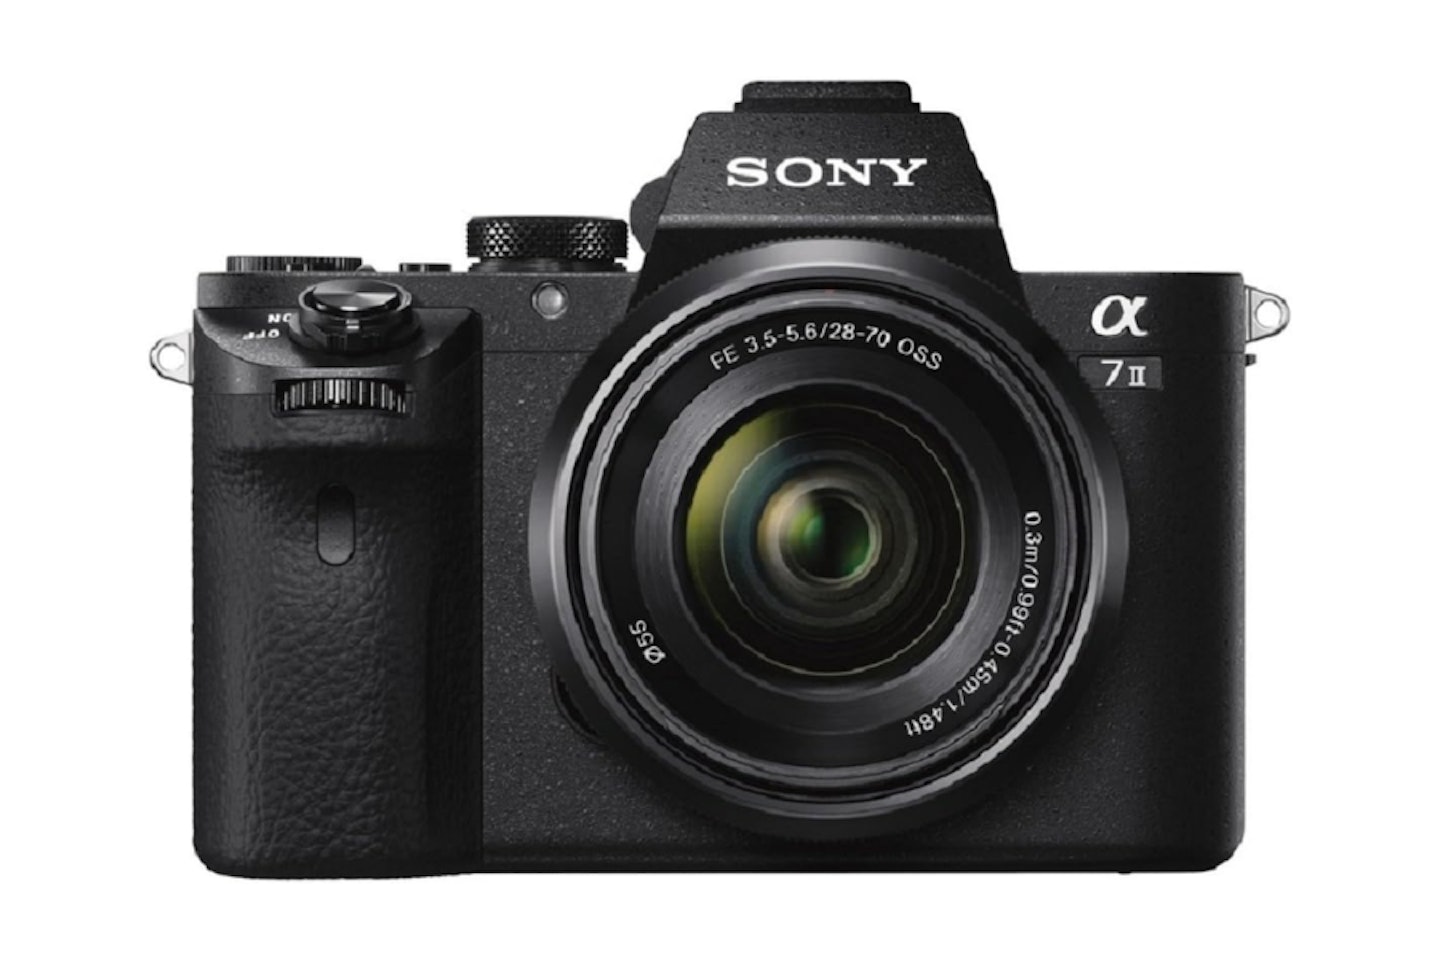 Sony Alpha 7 II -  Full-Frame Mirrorless Camera with Sony 28-70 mm f/3.5-5.6 Zoom Lens